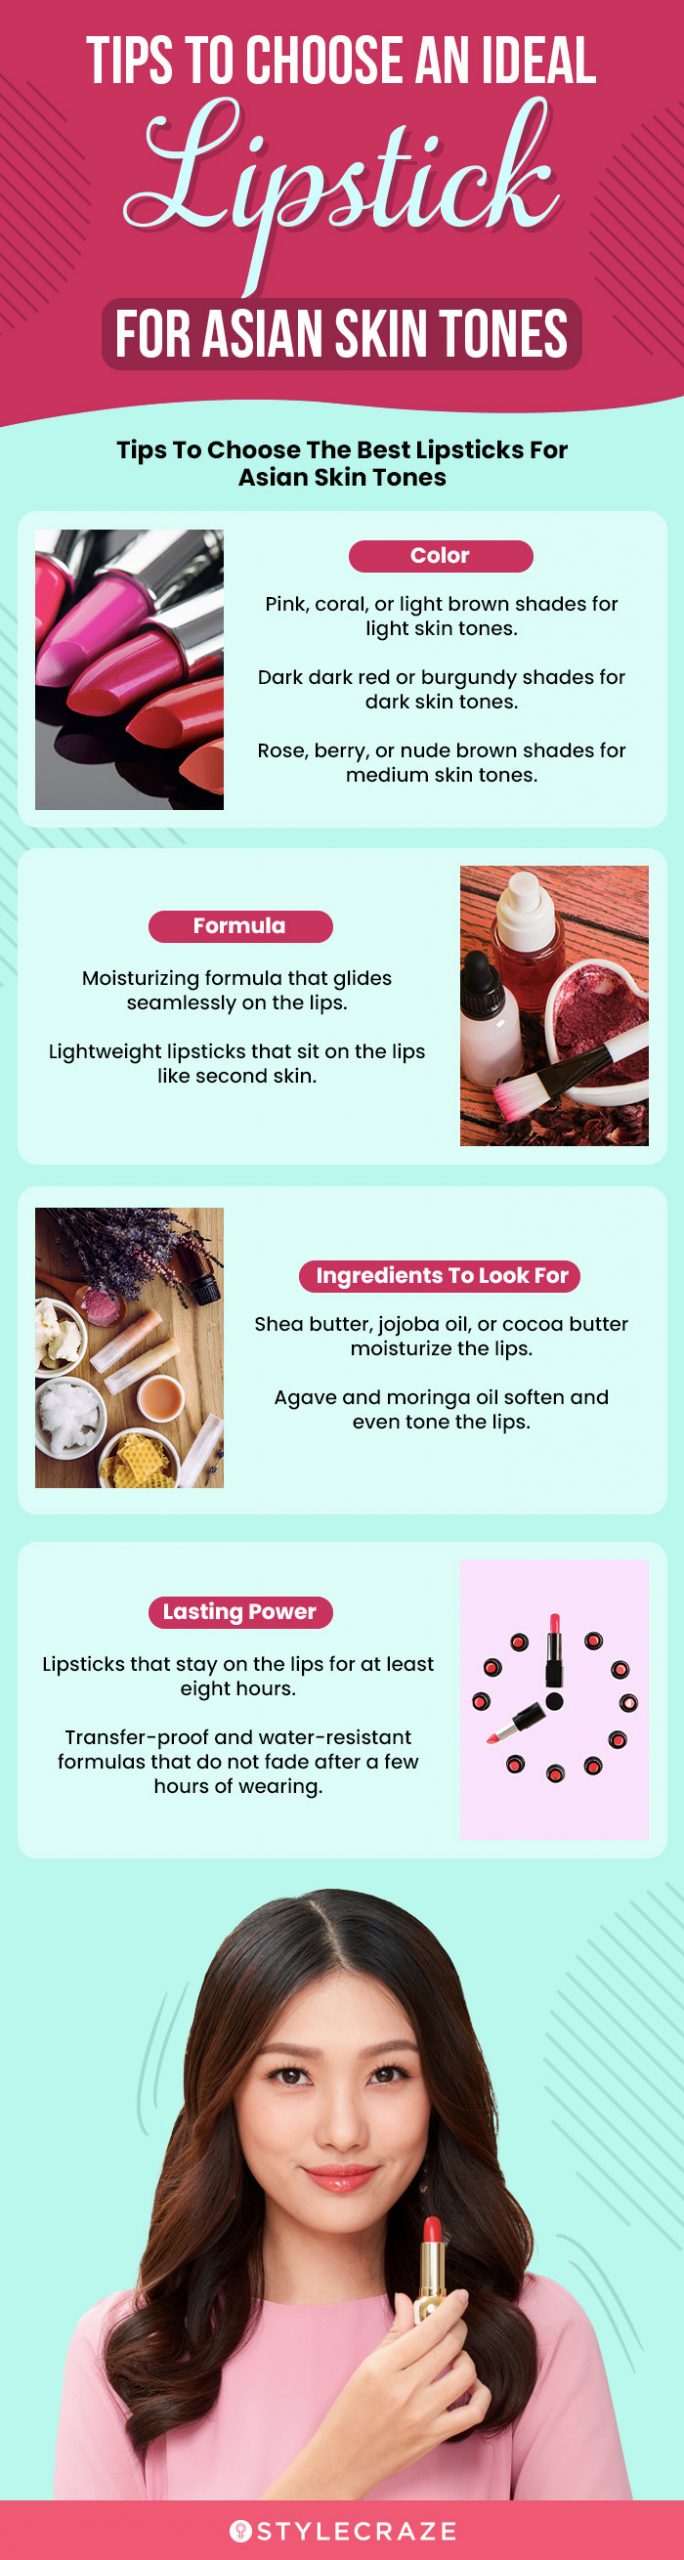 Tips To Choose An Ideal Lipstick For Asian Skin Tones (infographic)